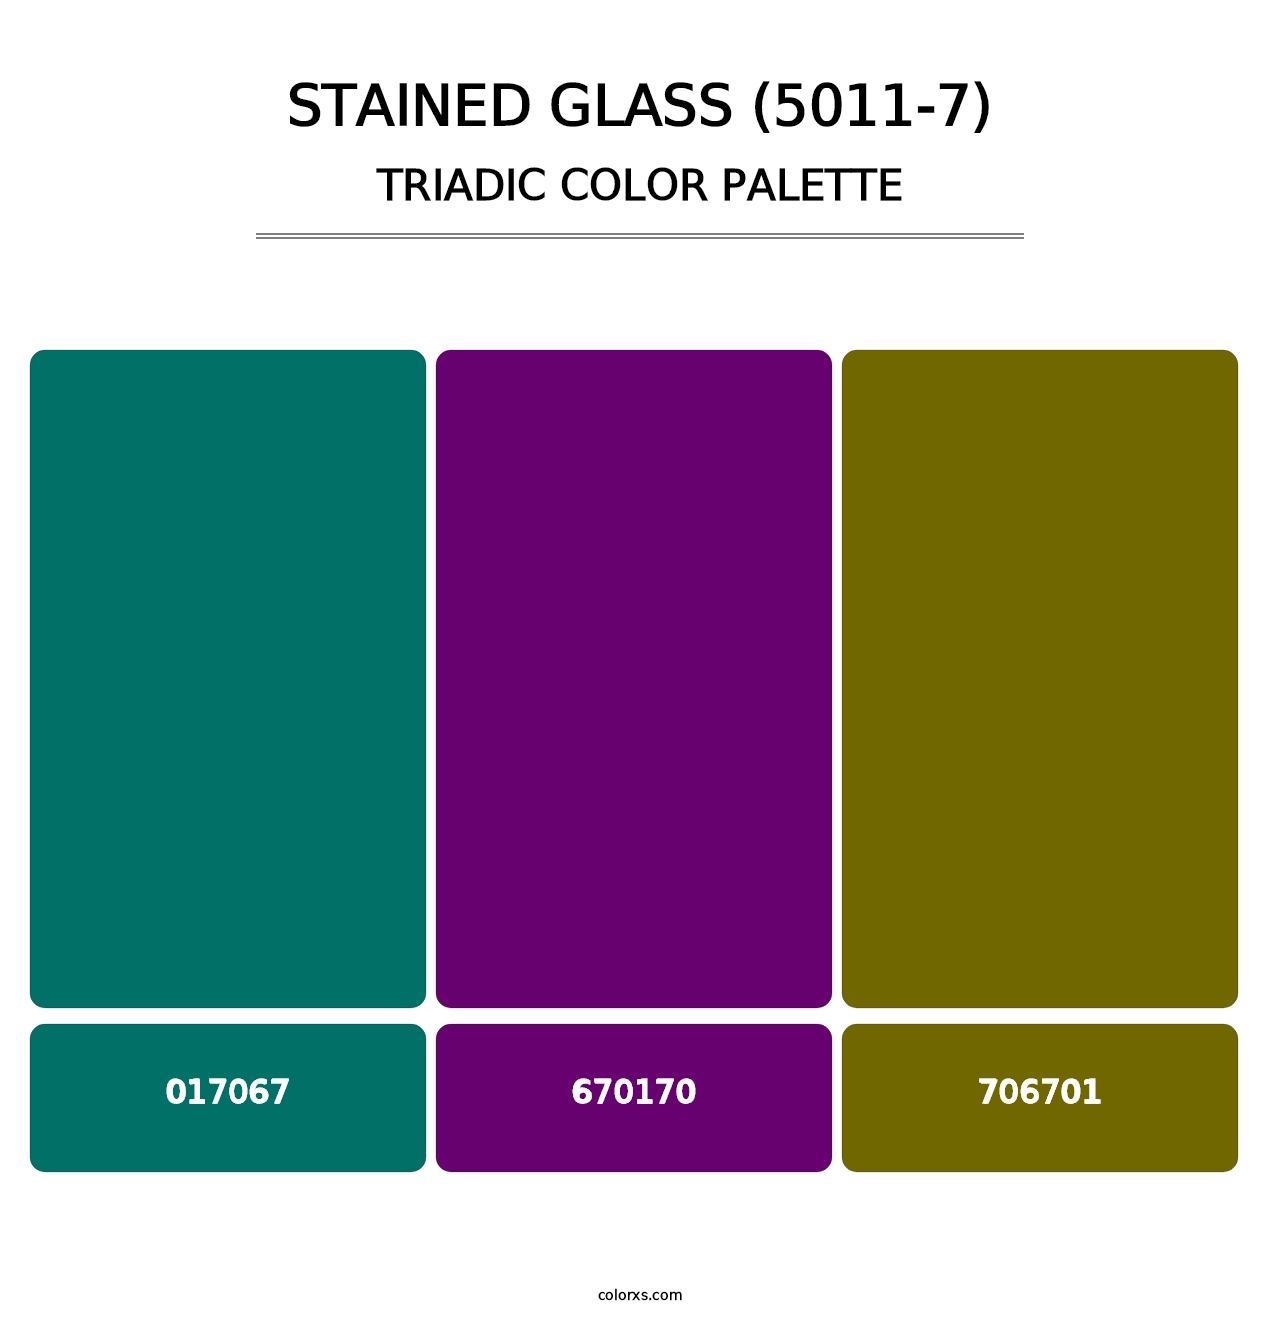 Stained Glass (5011-7) - Triadic Color Palette